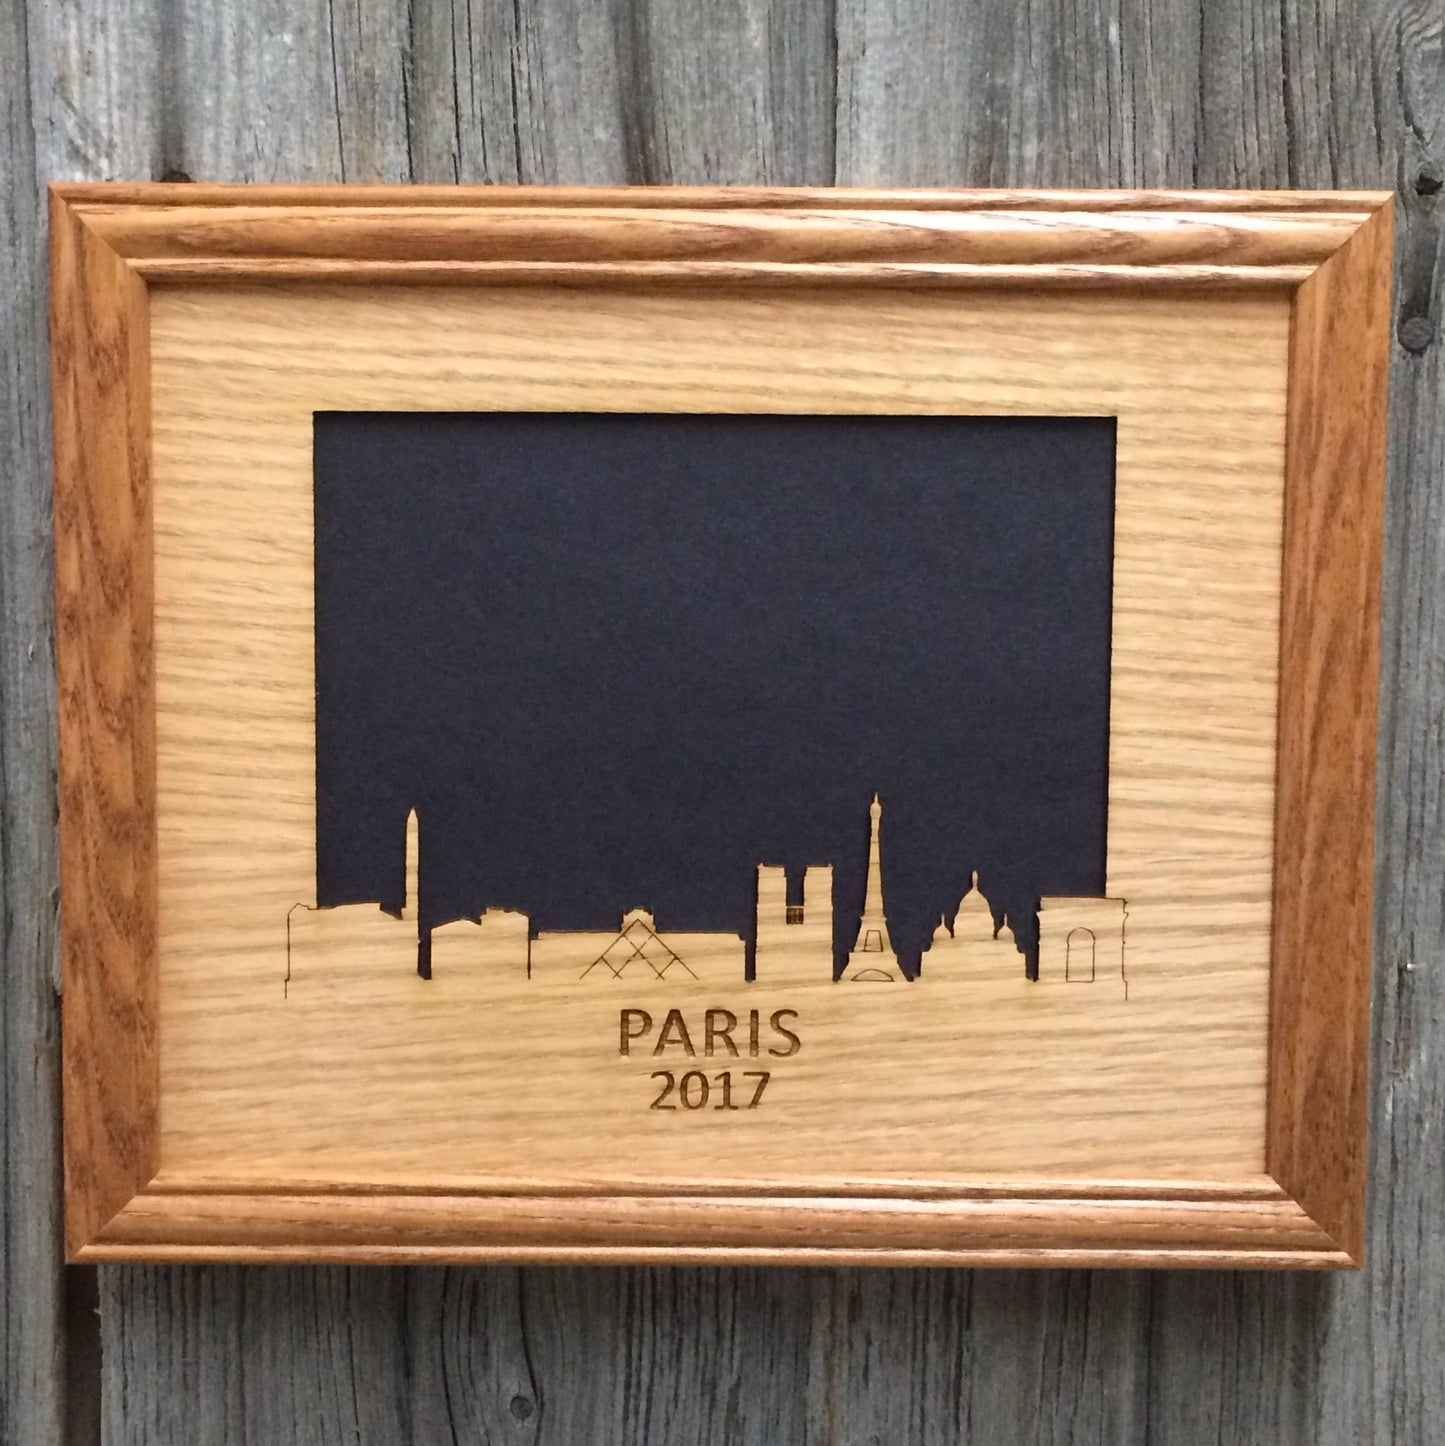 8x10 Paris Picture Frame, Picture Frame, home decor, laser engraved - Legacy Images